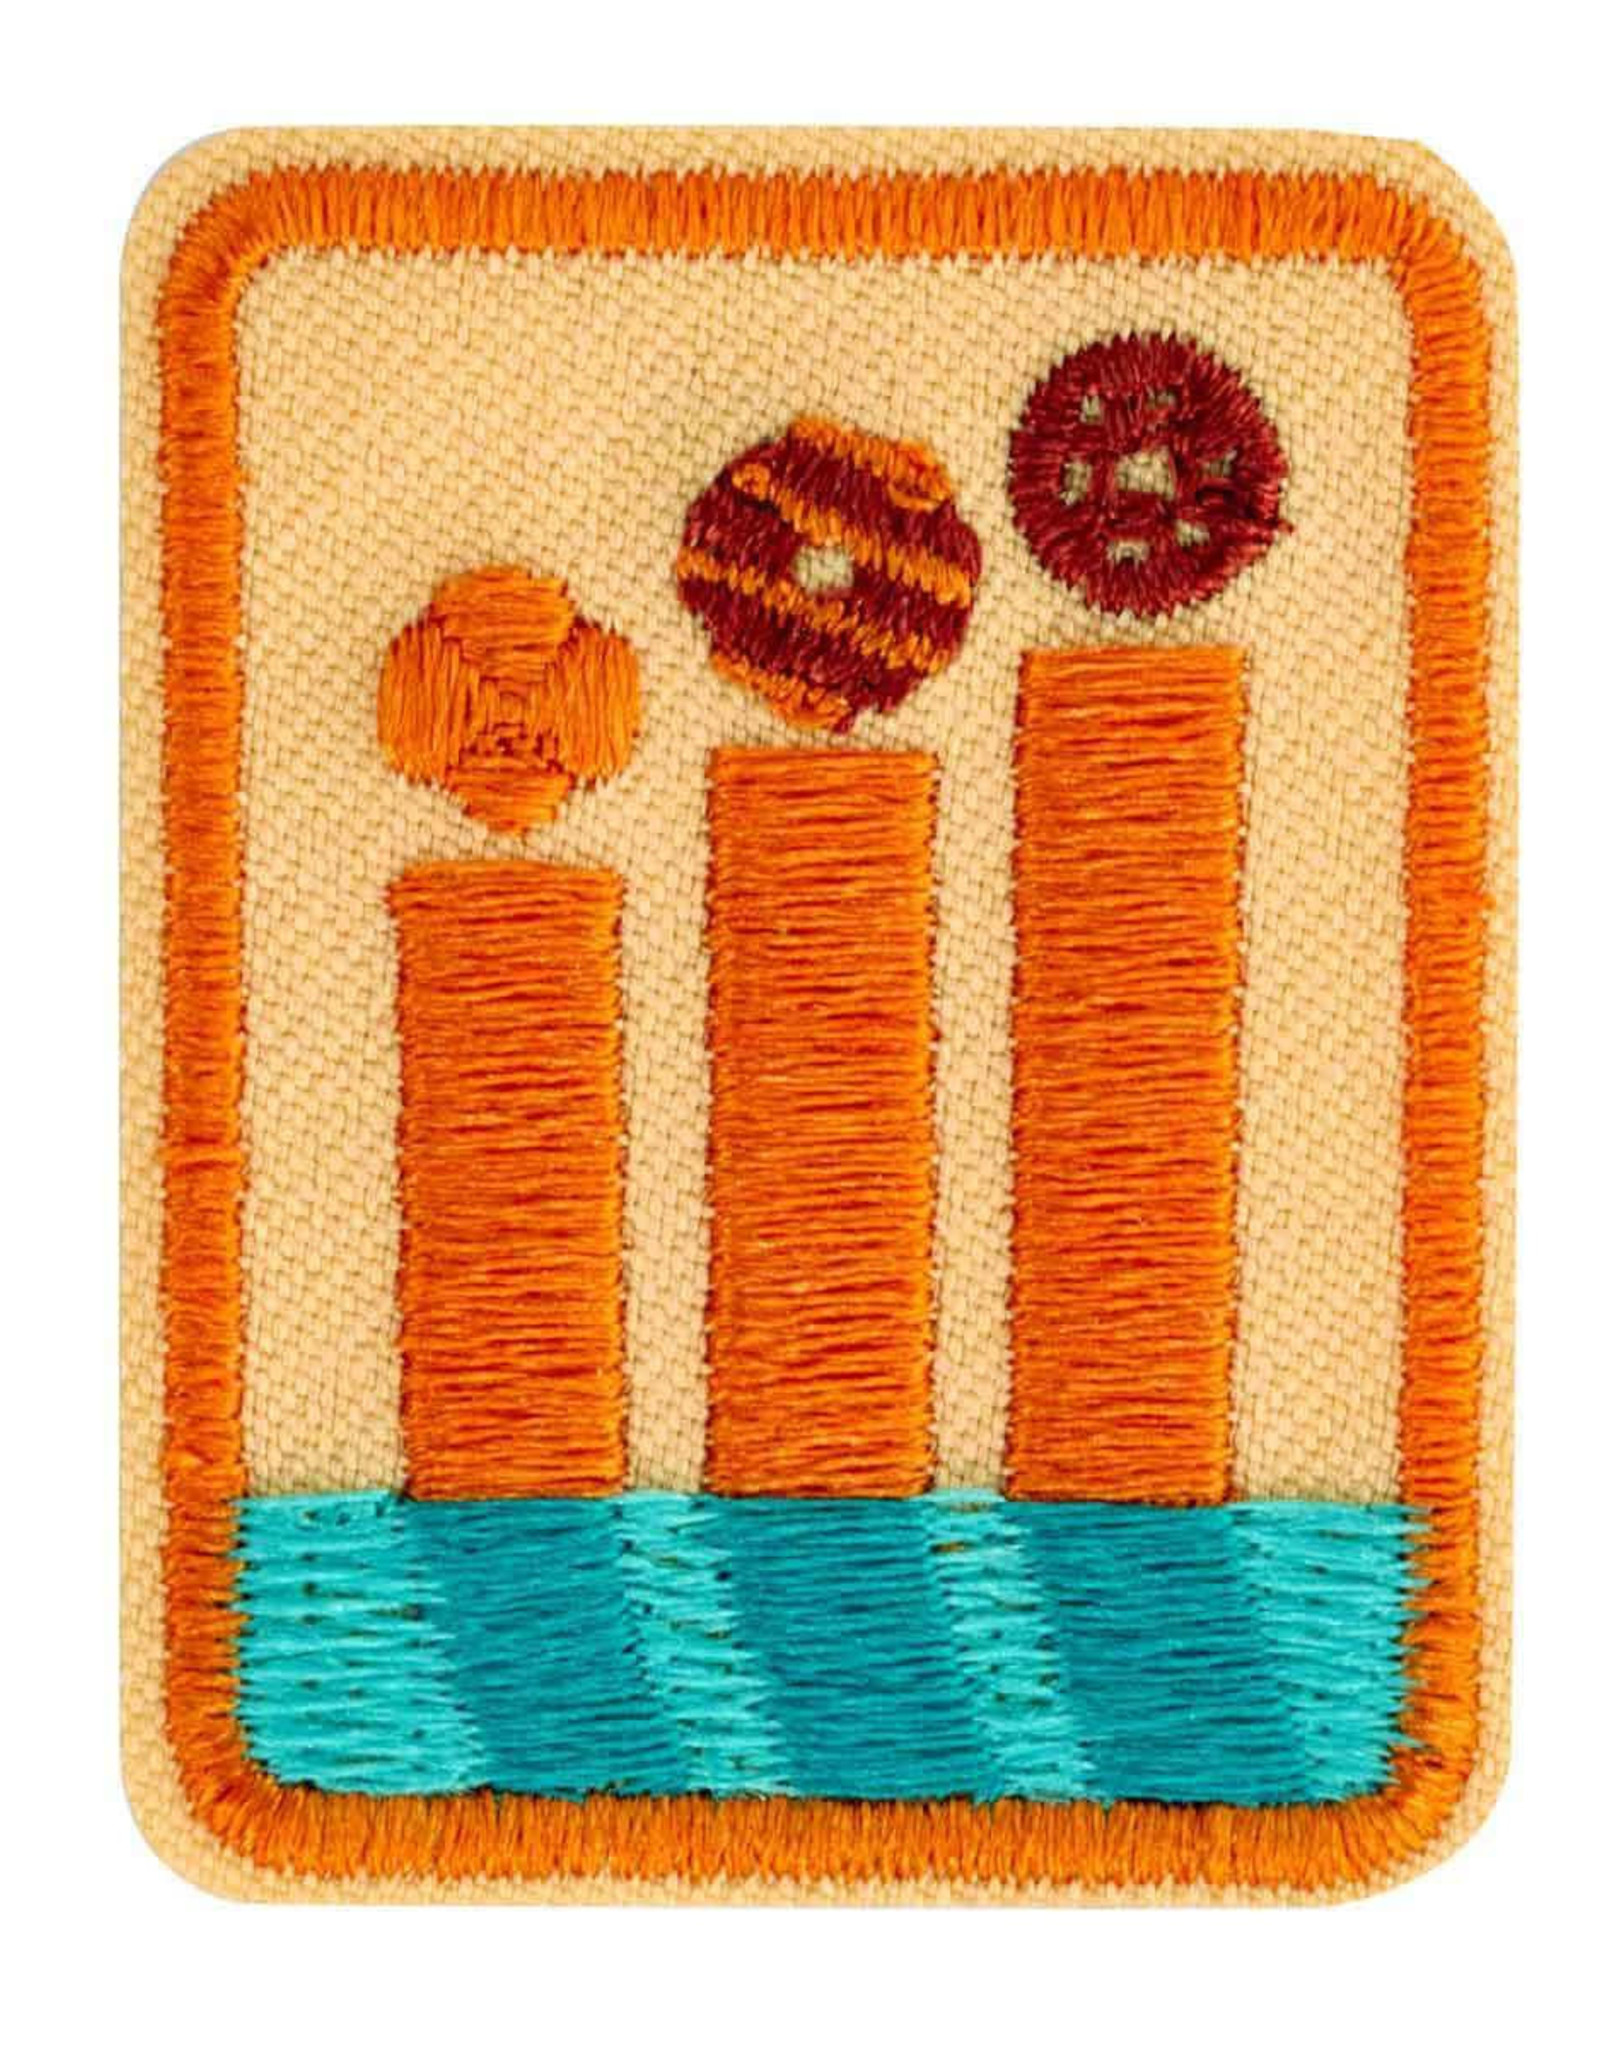 GIRL SCOUTS OF THE USA Senior Cookie Boss Badge